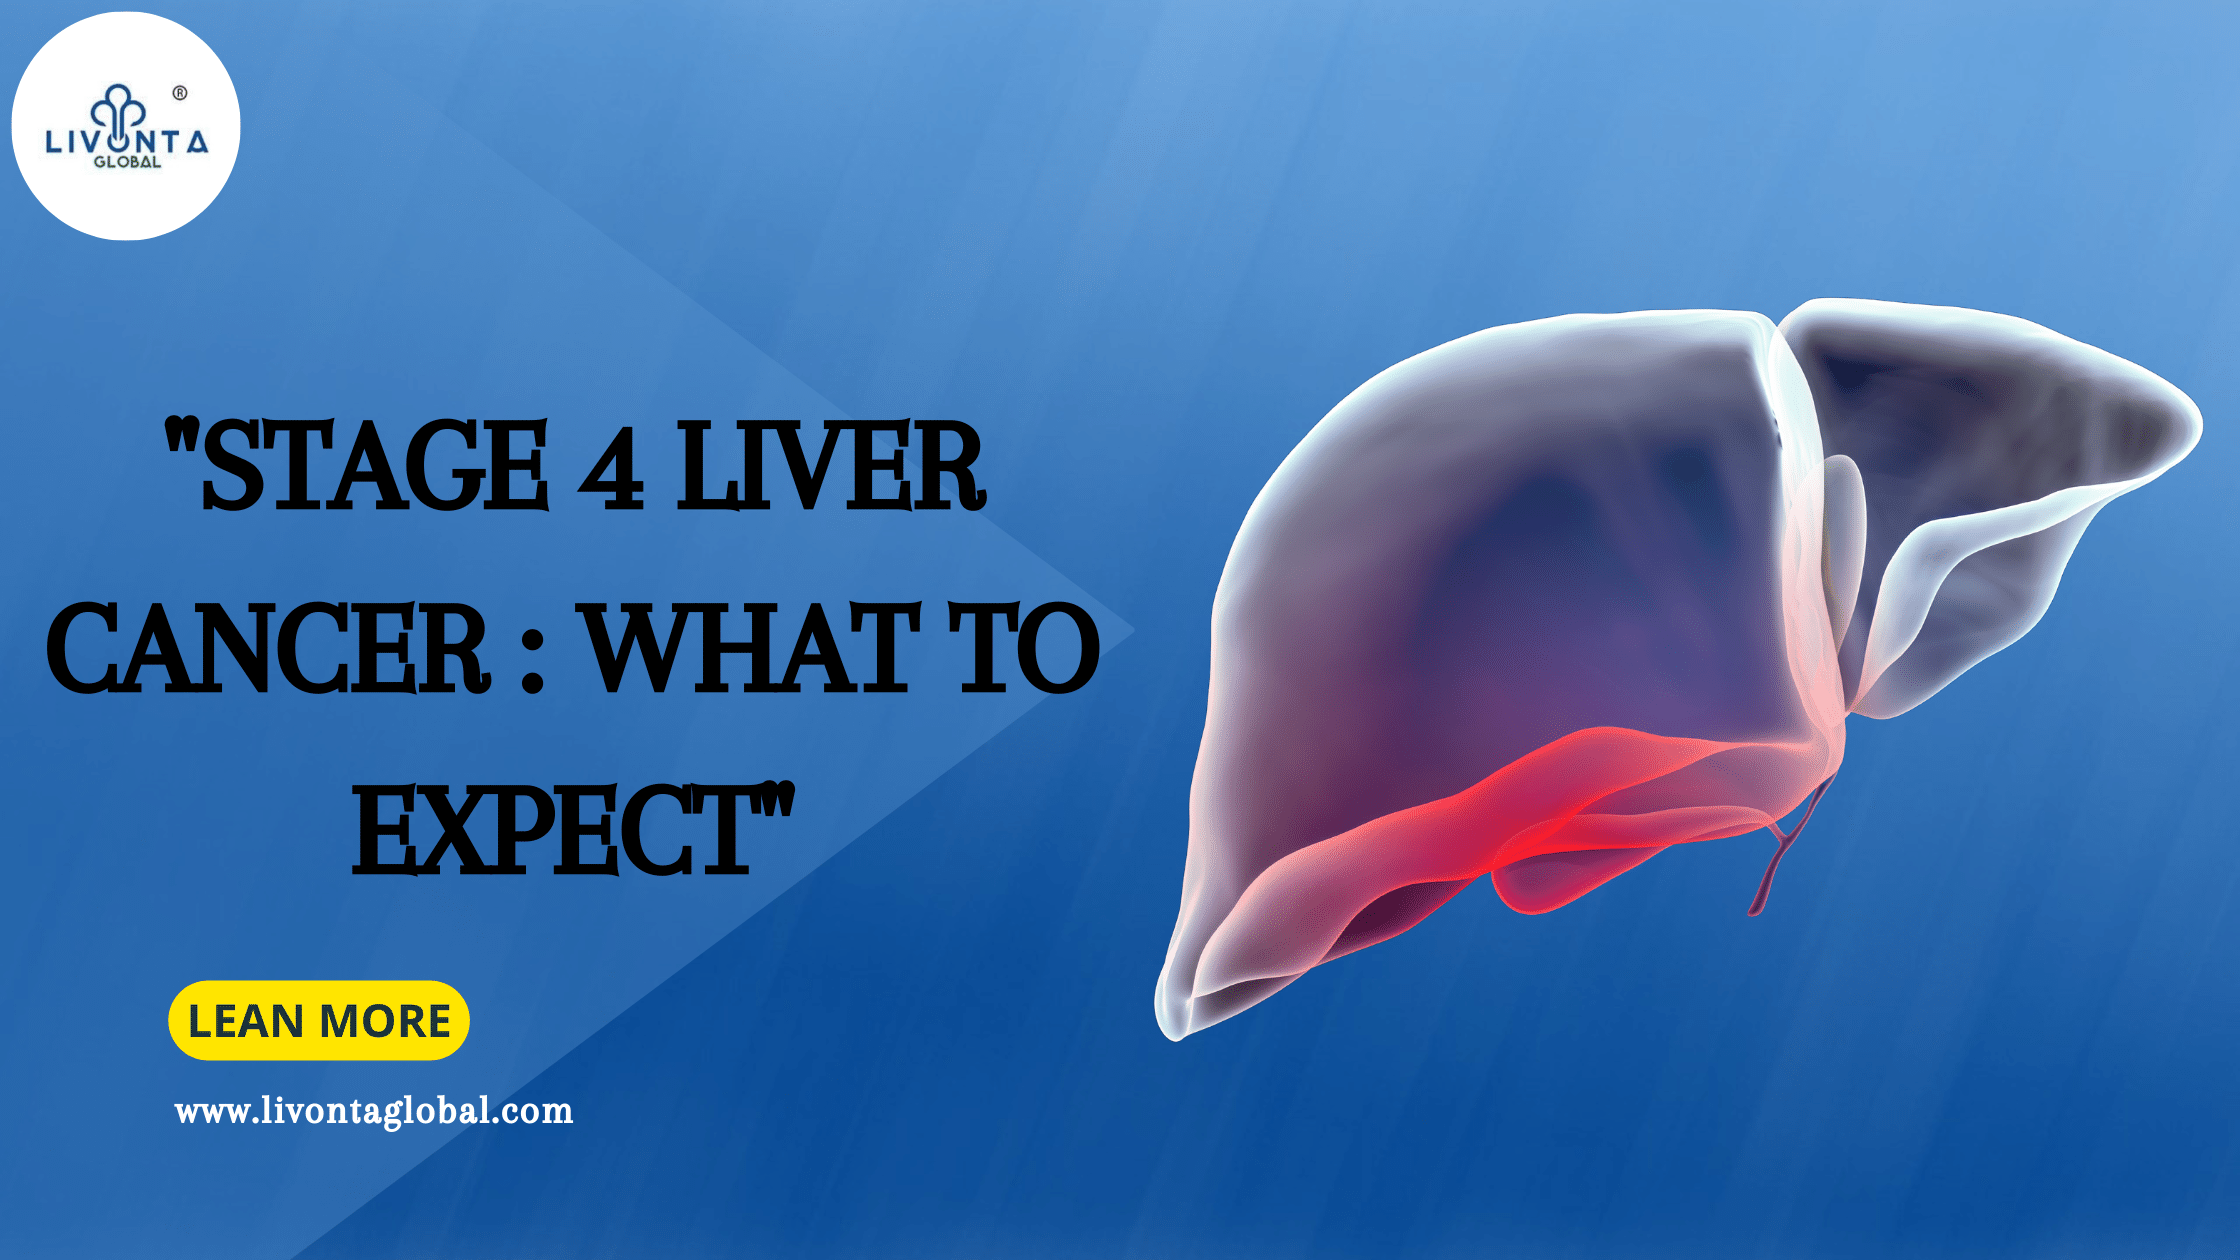 "Stage 4 Liver Cancer: What to Expect"